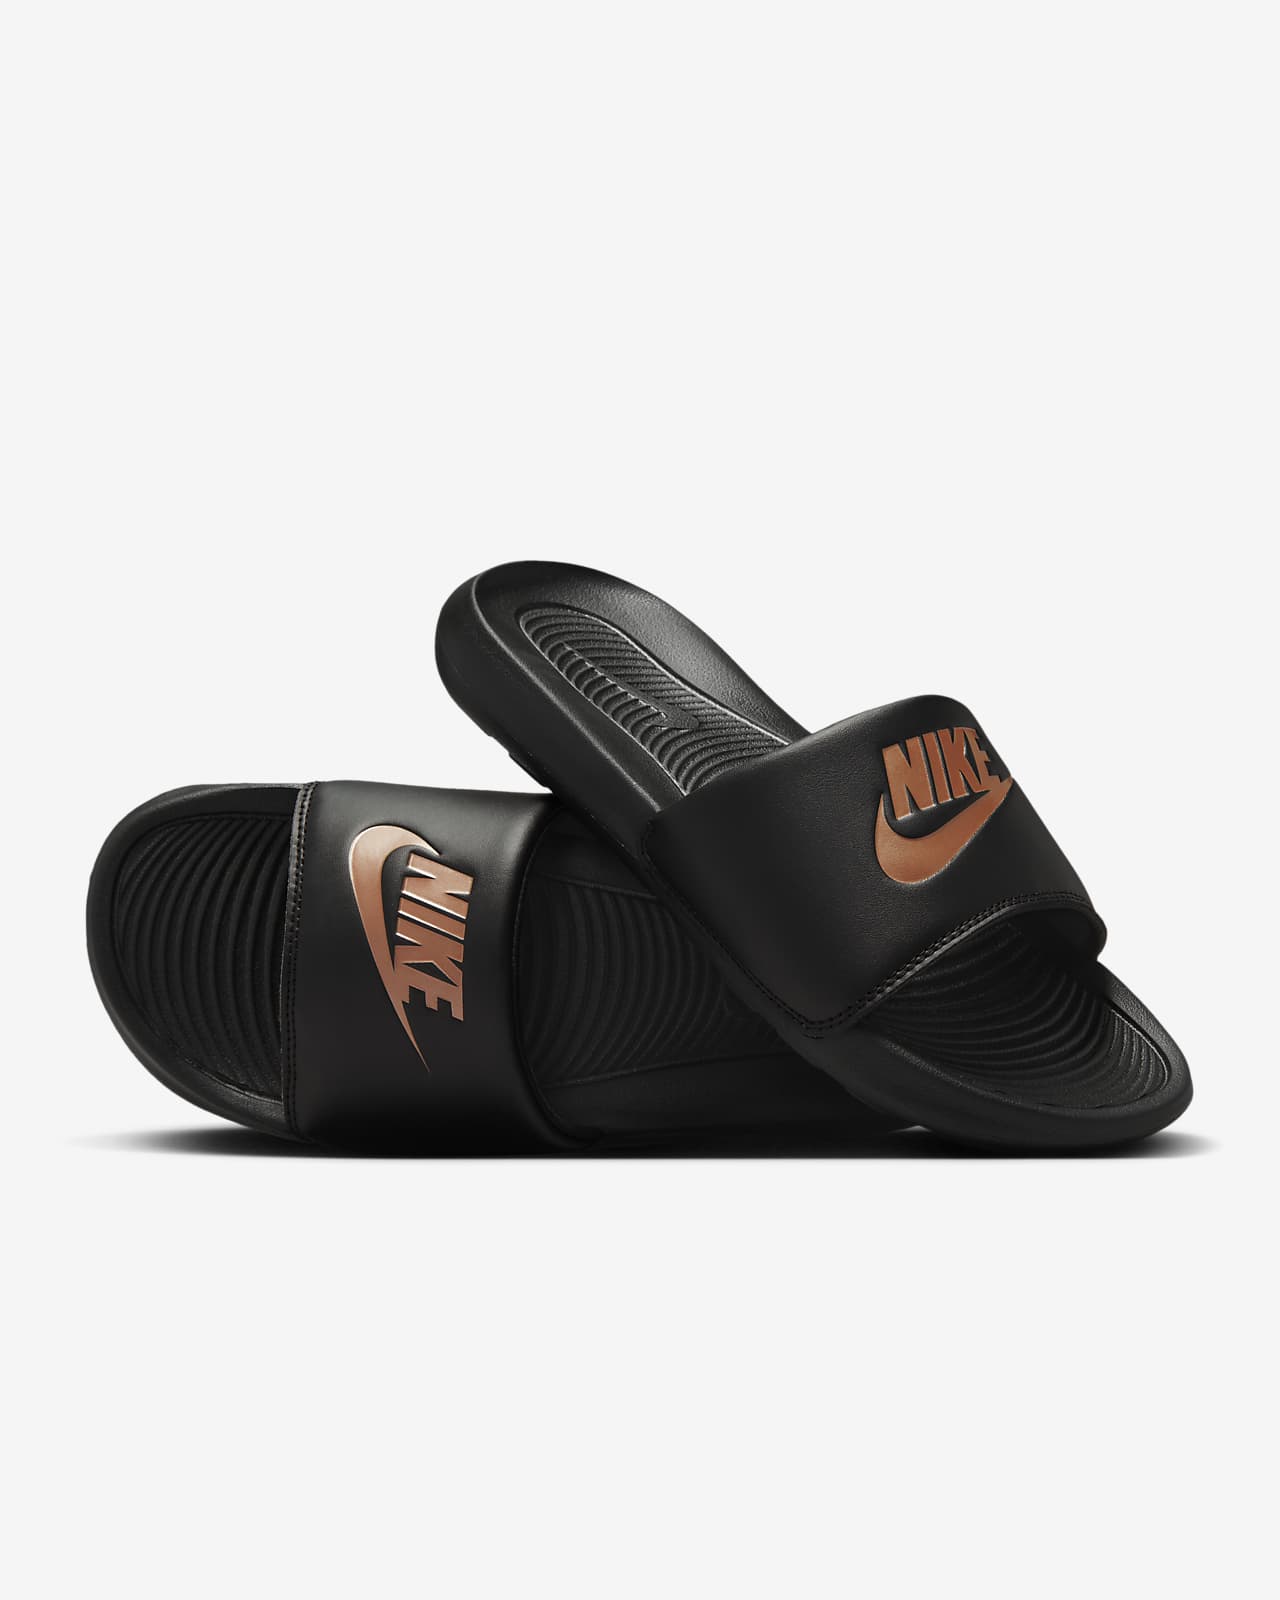 Nike Victori One slides in black and red